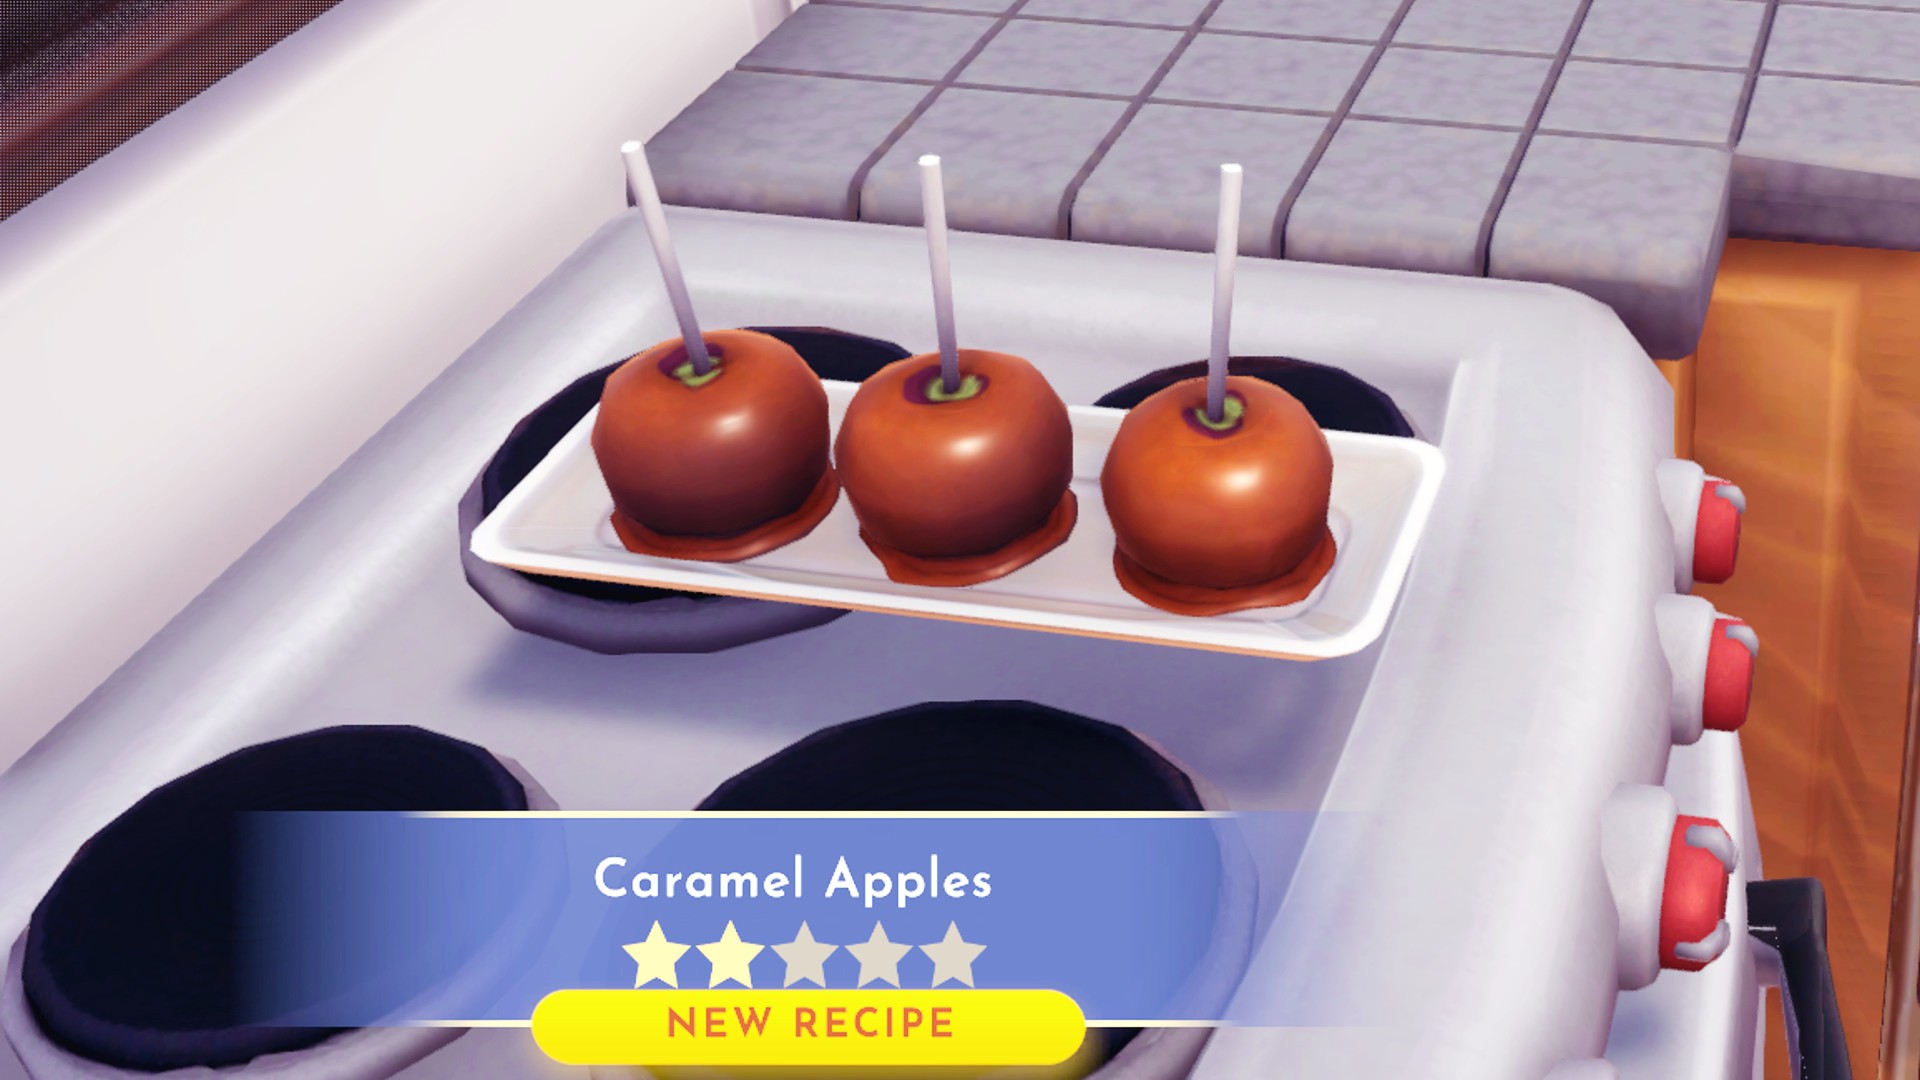 Disney Dreamlight Valley desserts: three Caramel Apples sit on a plate, demonstrating the two-star recipe.